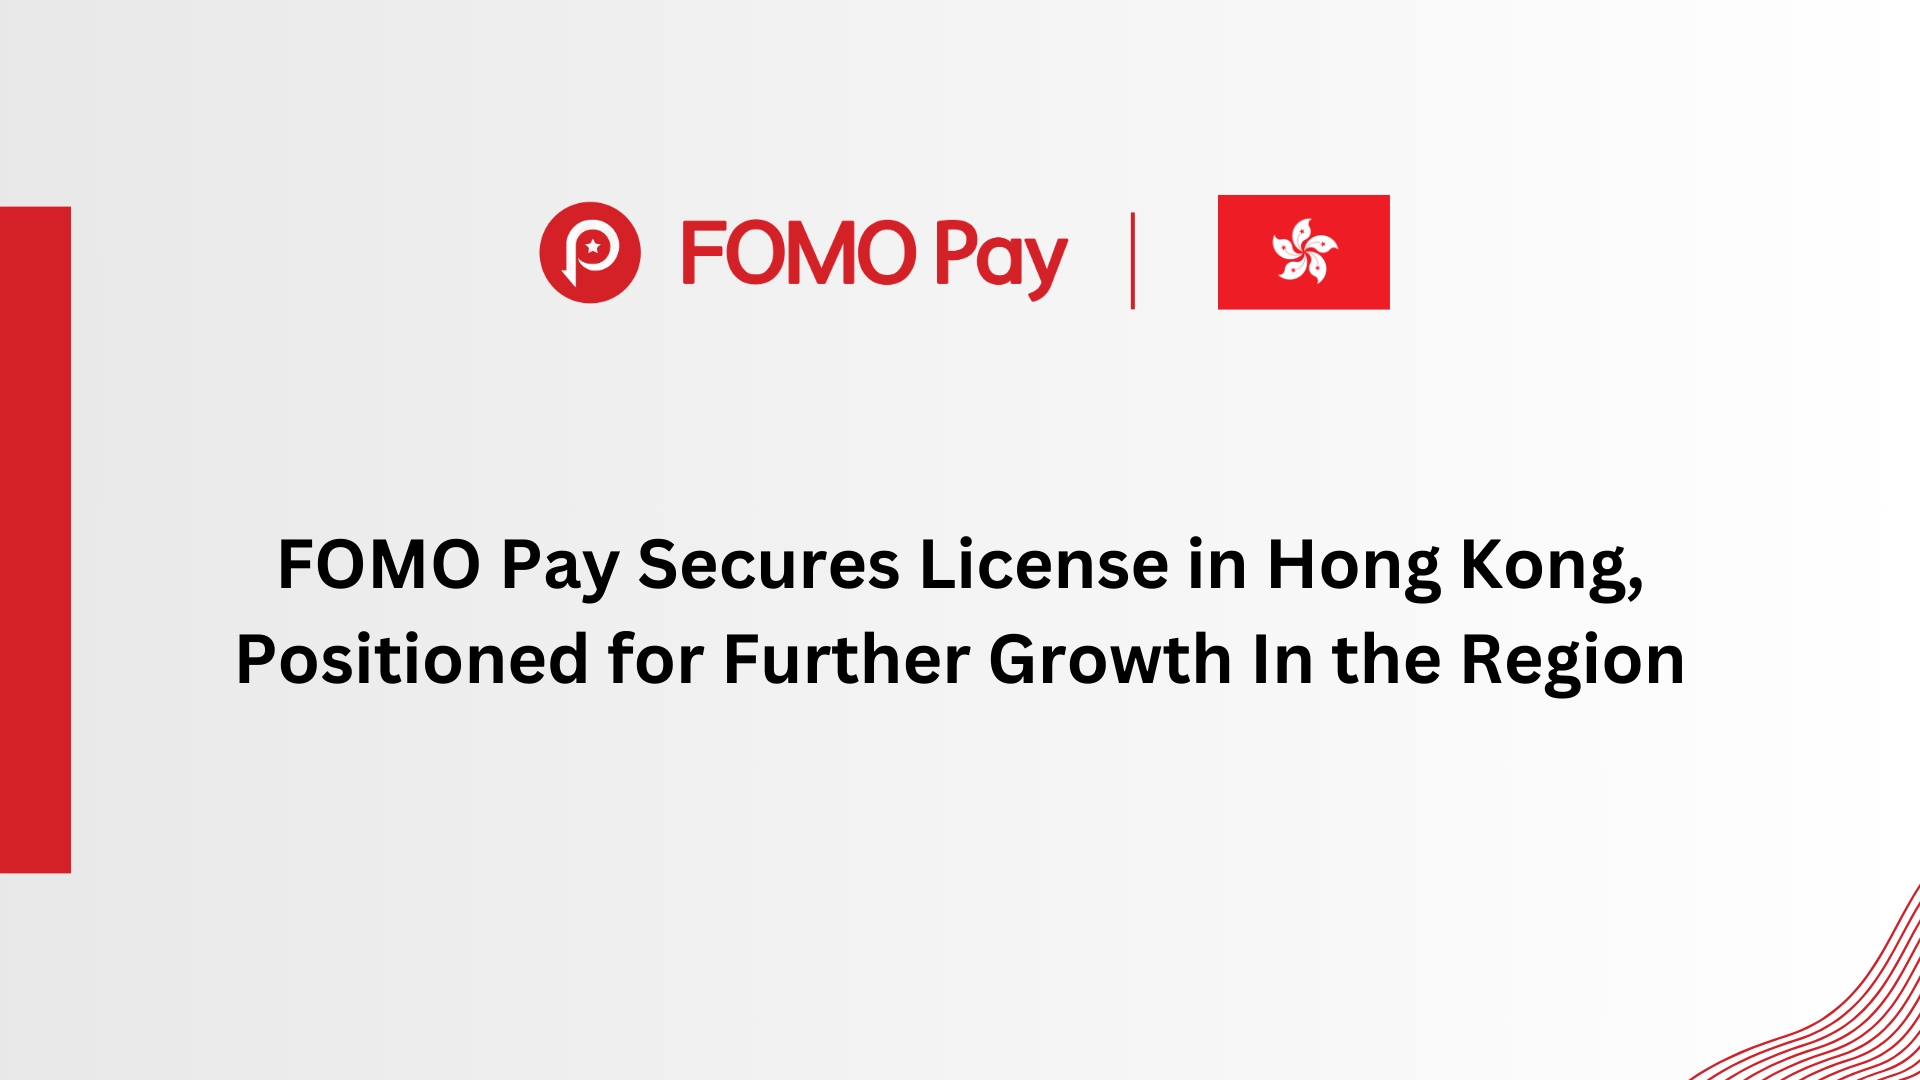 FOMO Pay Secures License in Hong Kong, Positioned for Further Growth In the Region